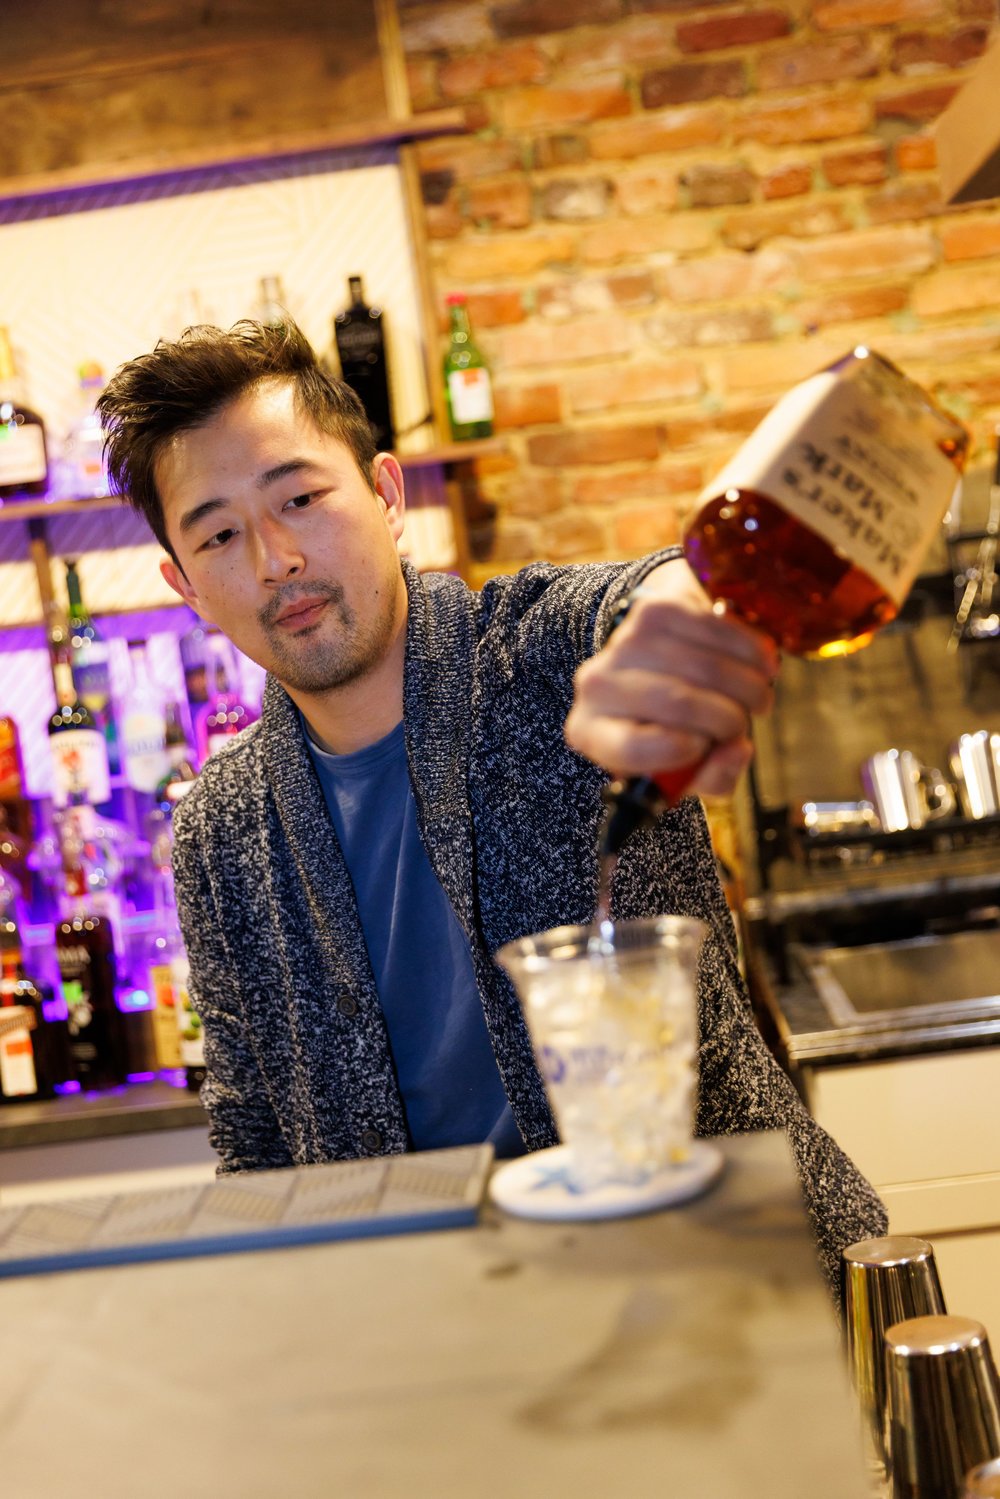 Josh Choi, the owner of Winterbloom, pours a drink in a cup used to serve patrons in the downtown social district.